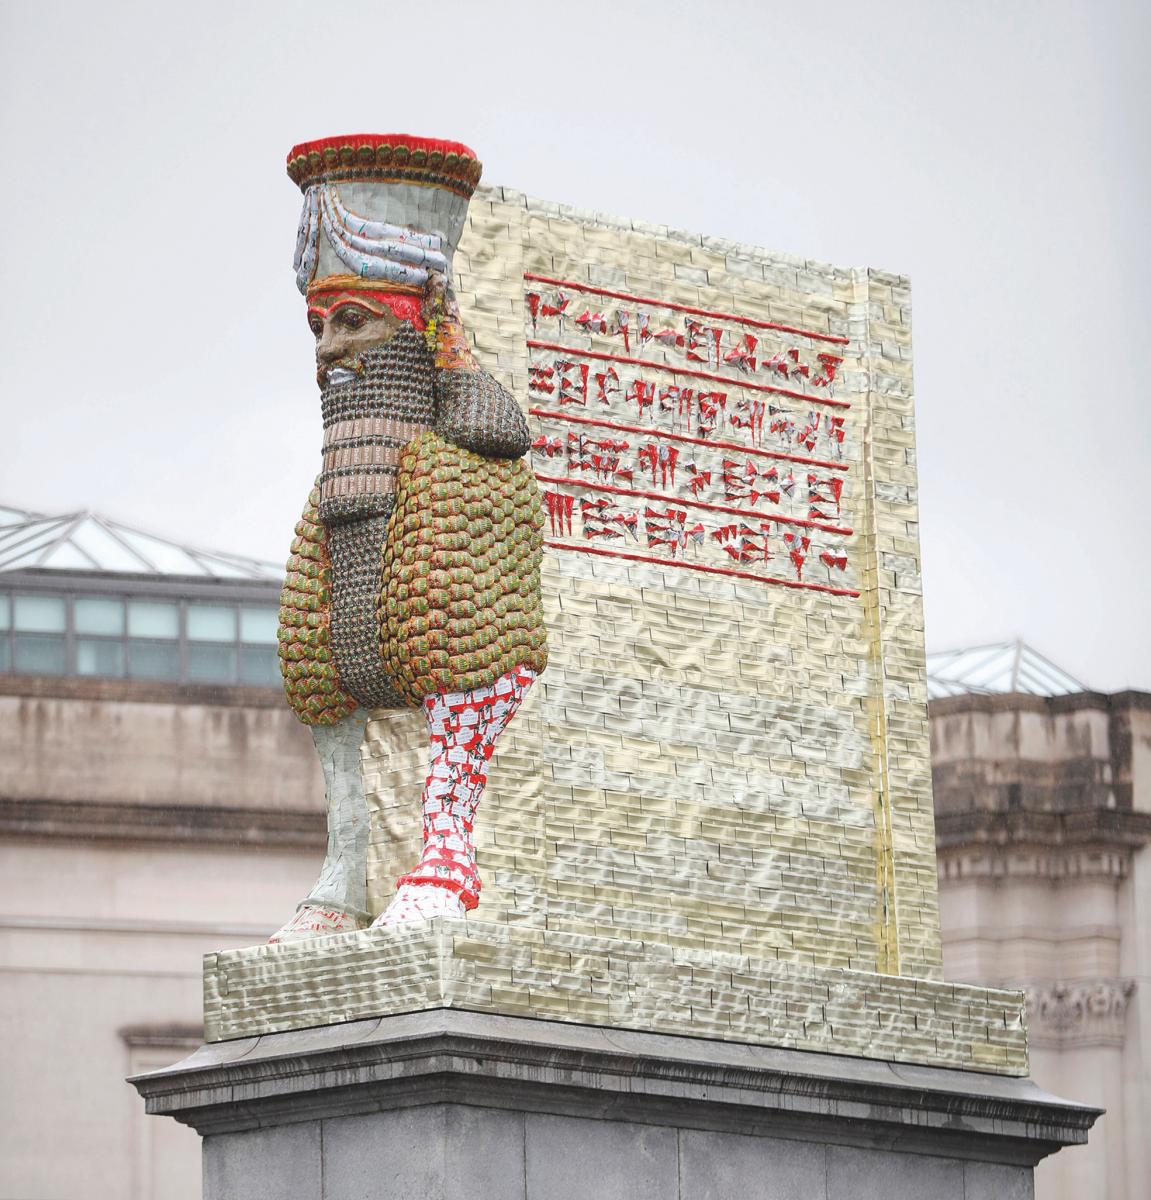 The Invisible Enemy Should Not Exist, Fourth Plinth, 2019